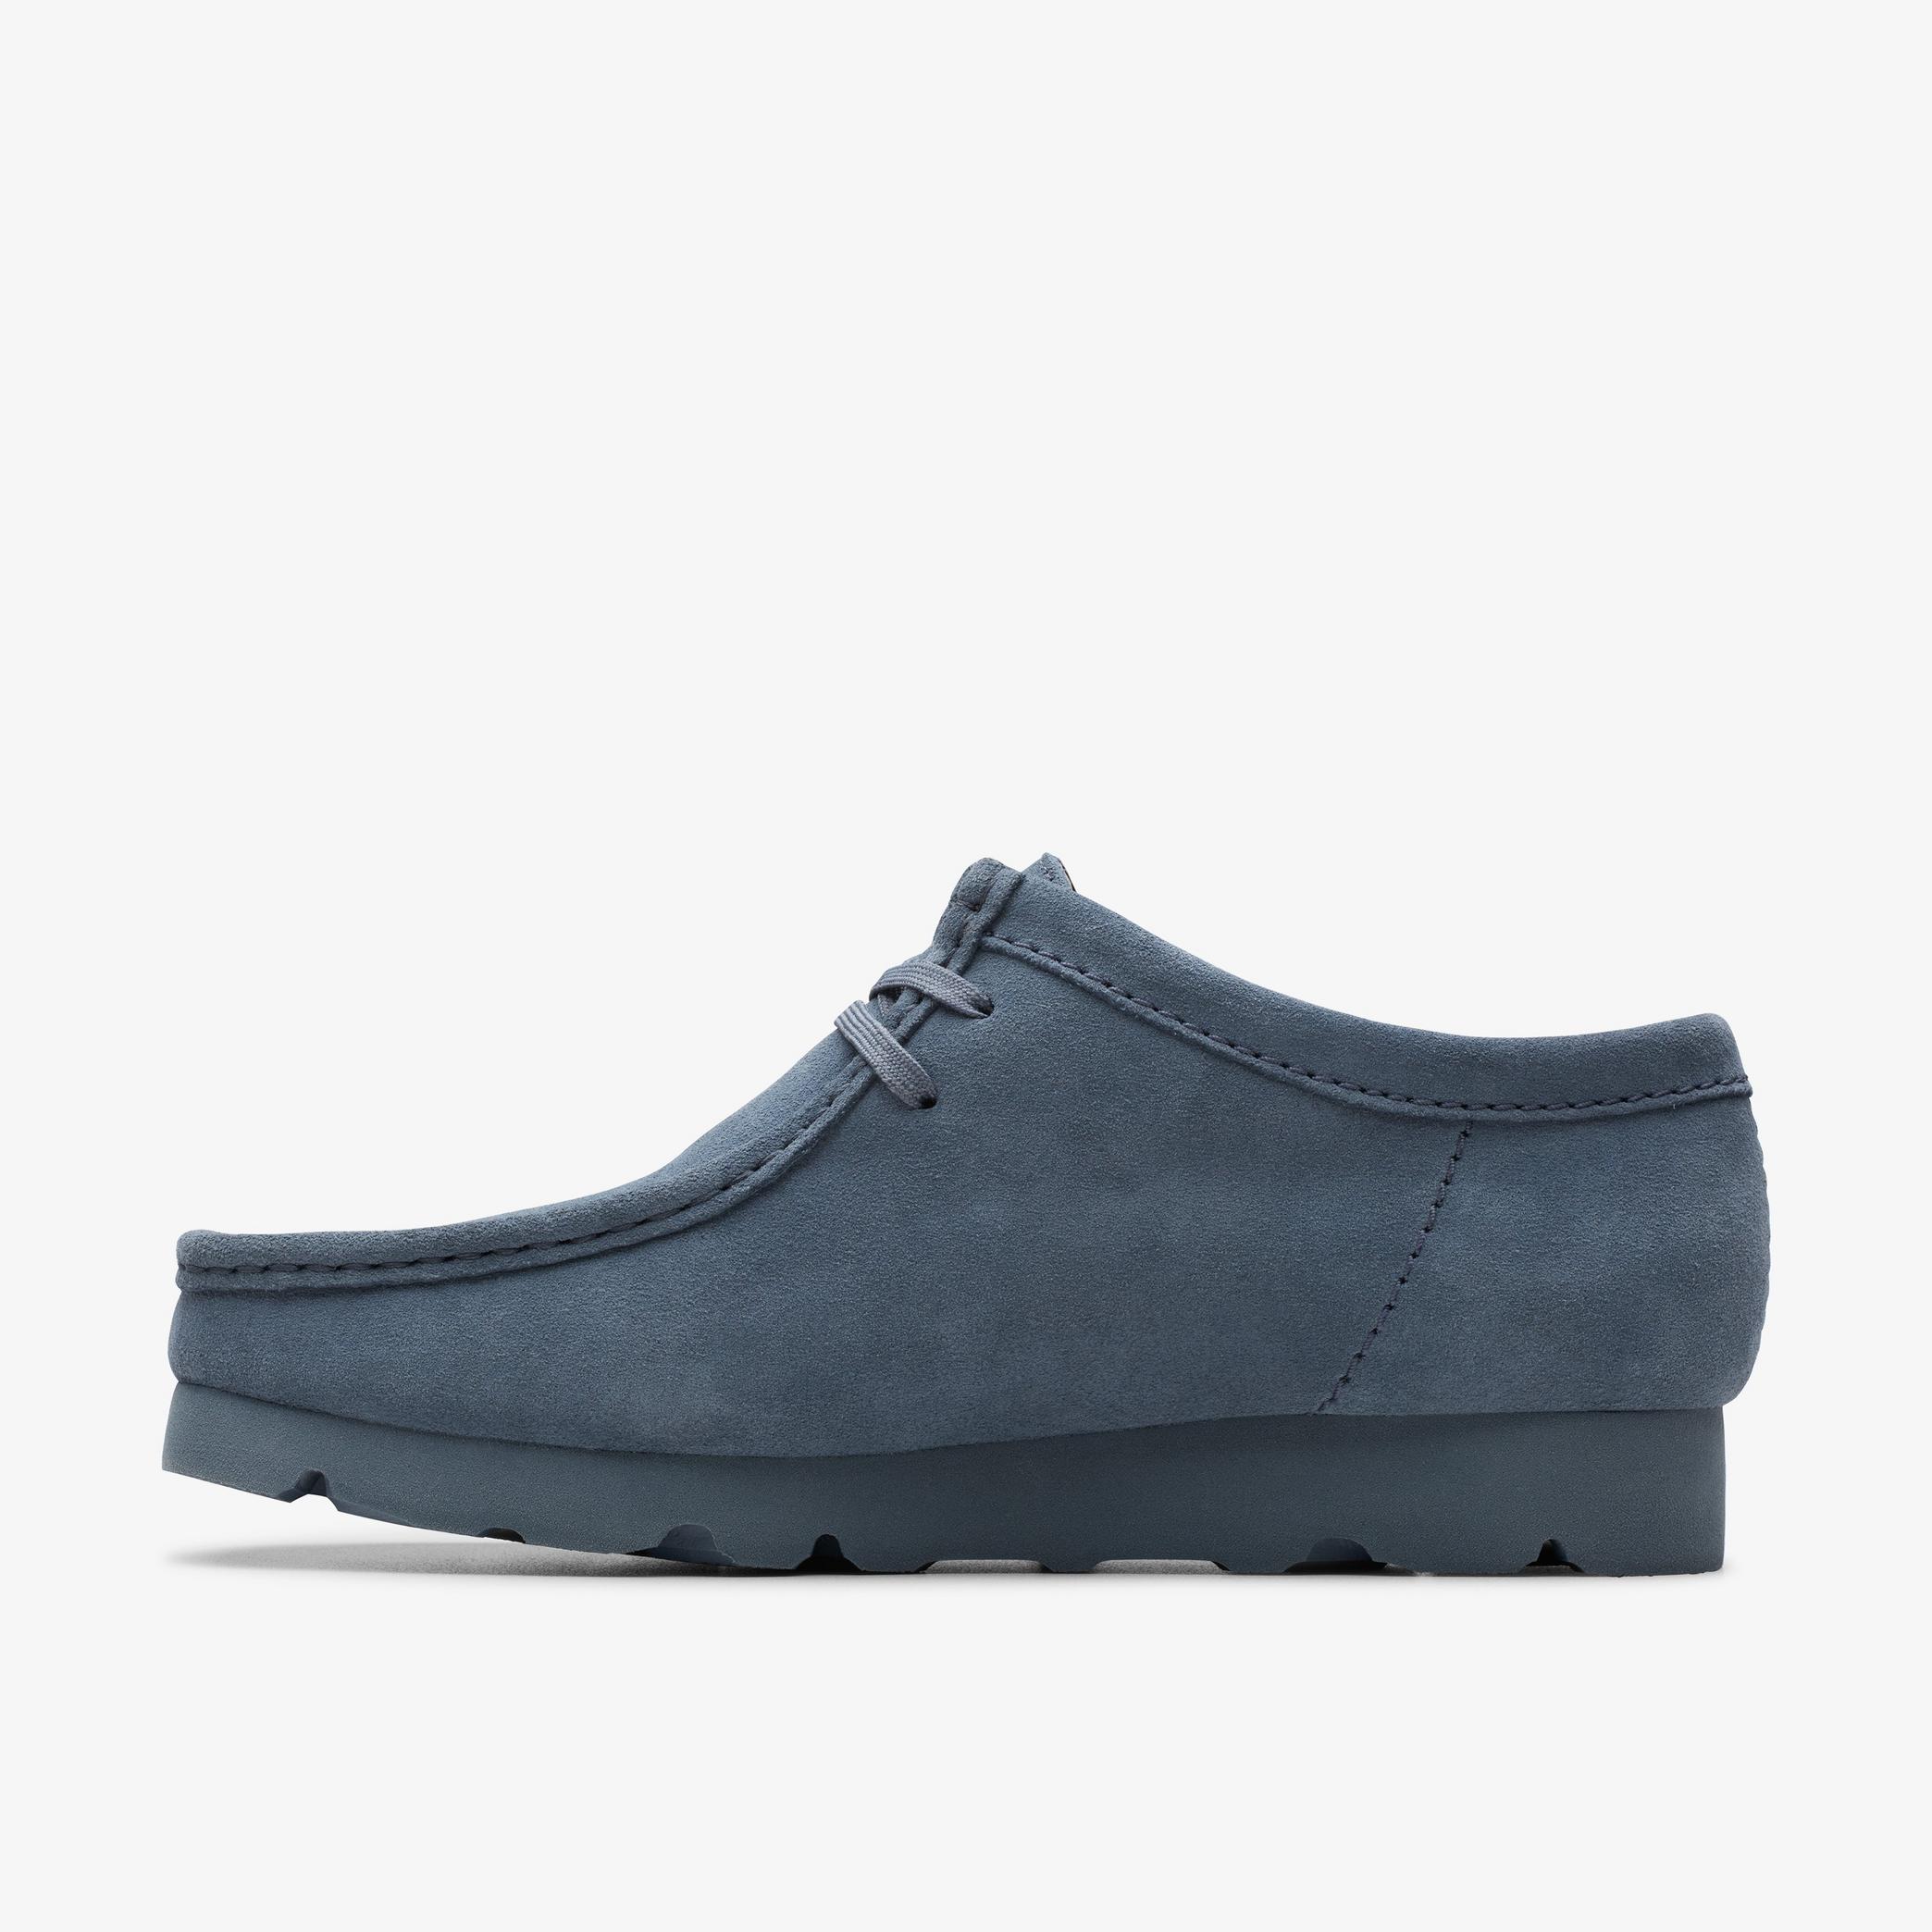 Wallabee GORE-TEX Blue/Grey Suede Shoes, view 2 of 7